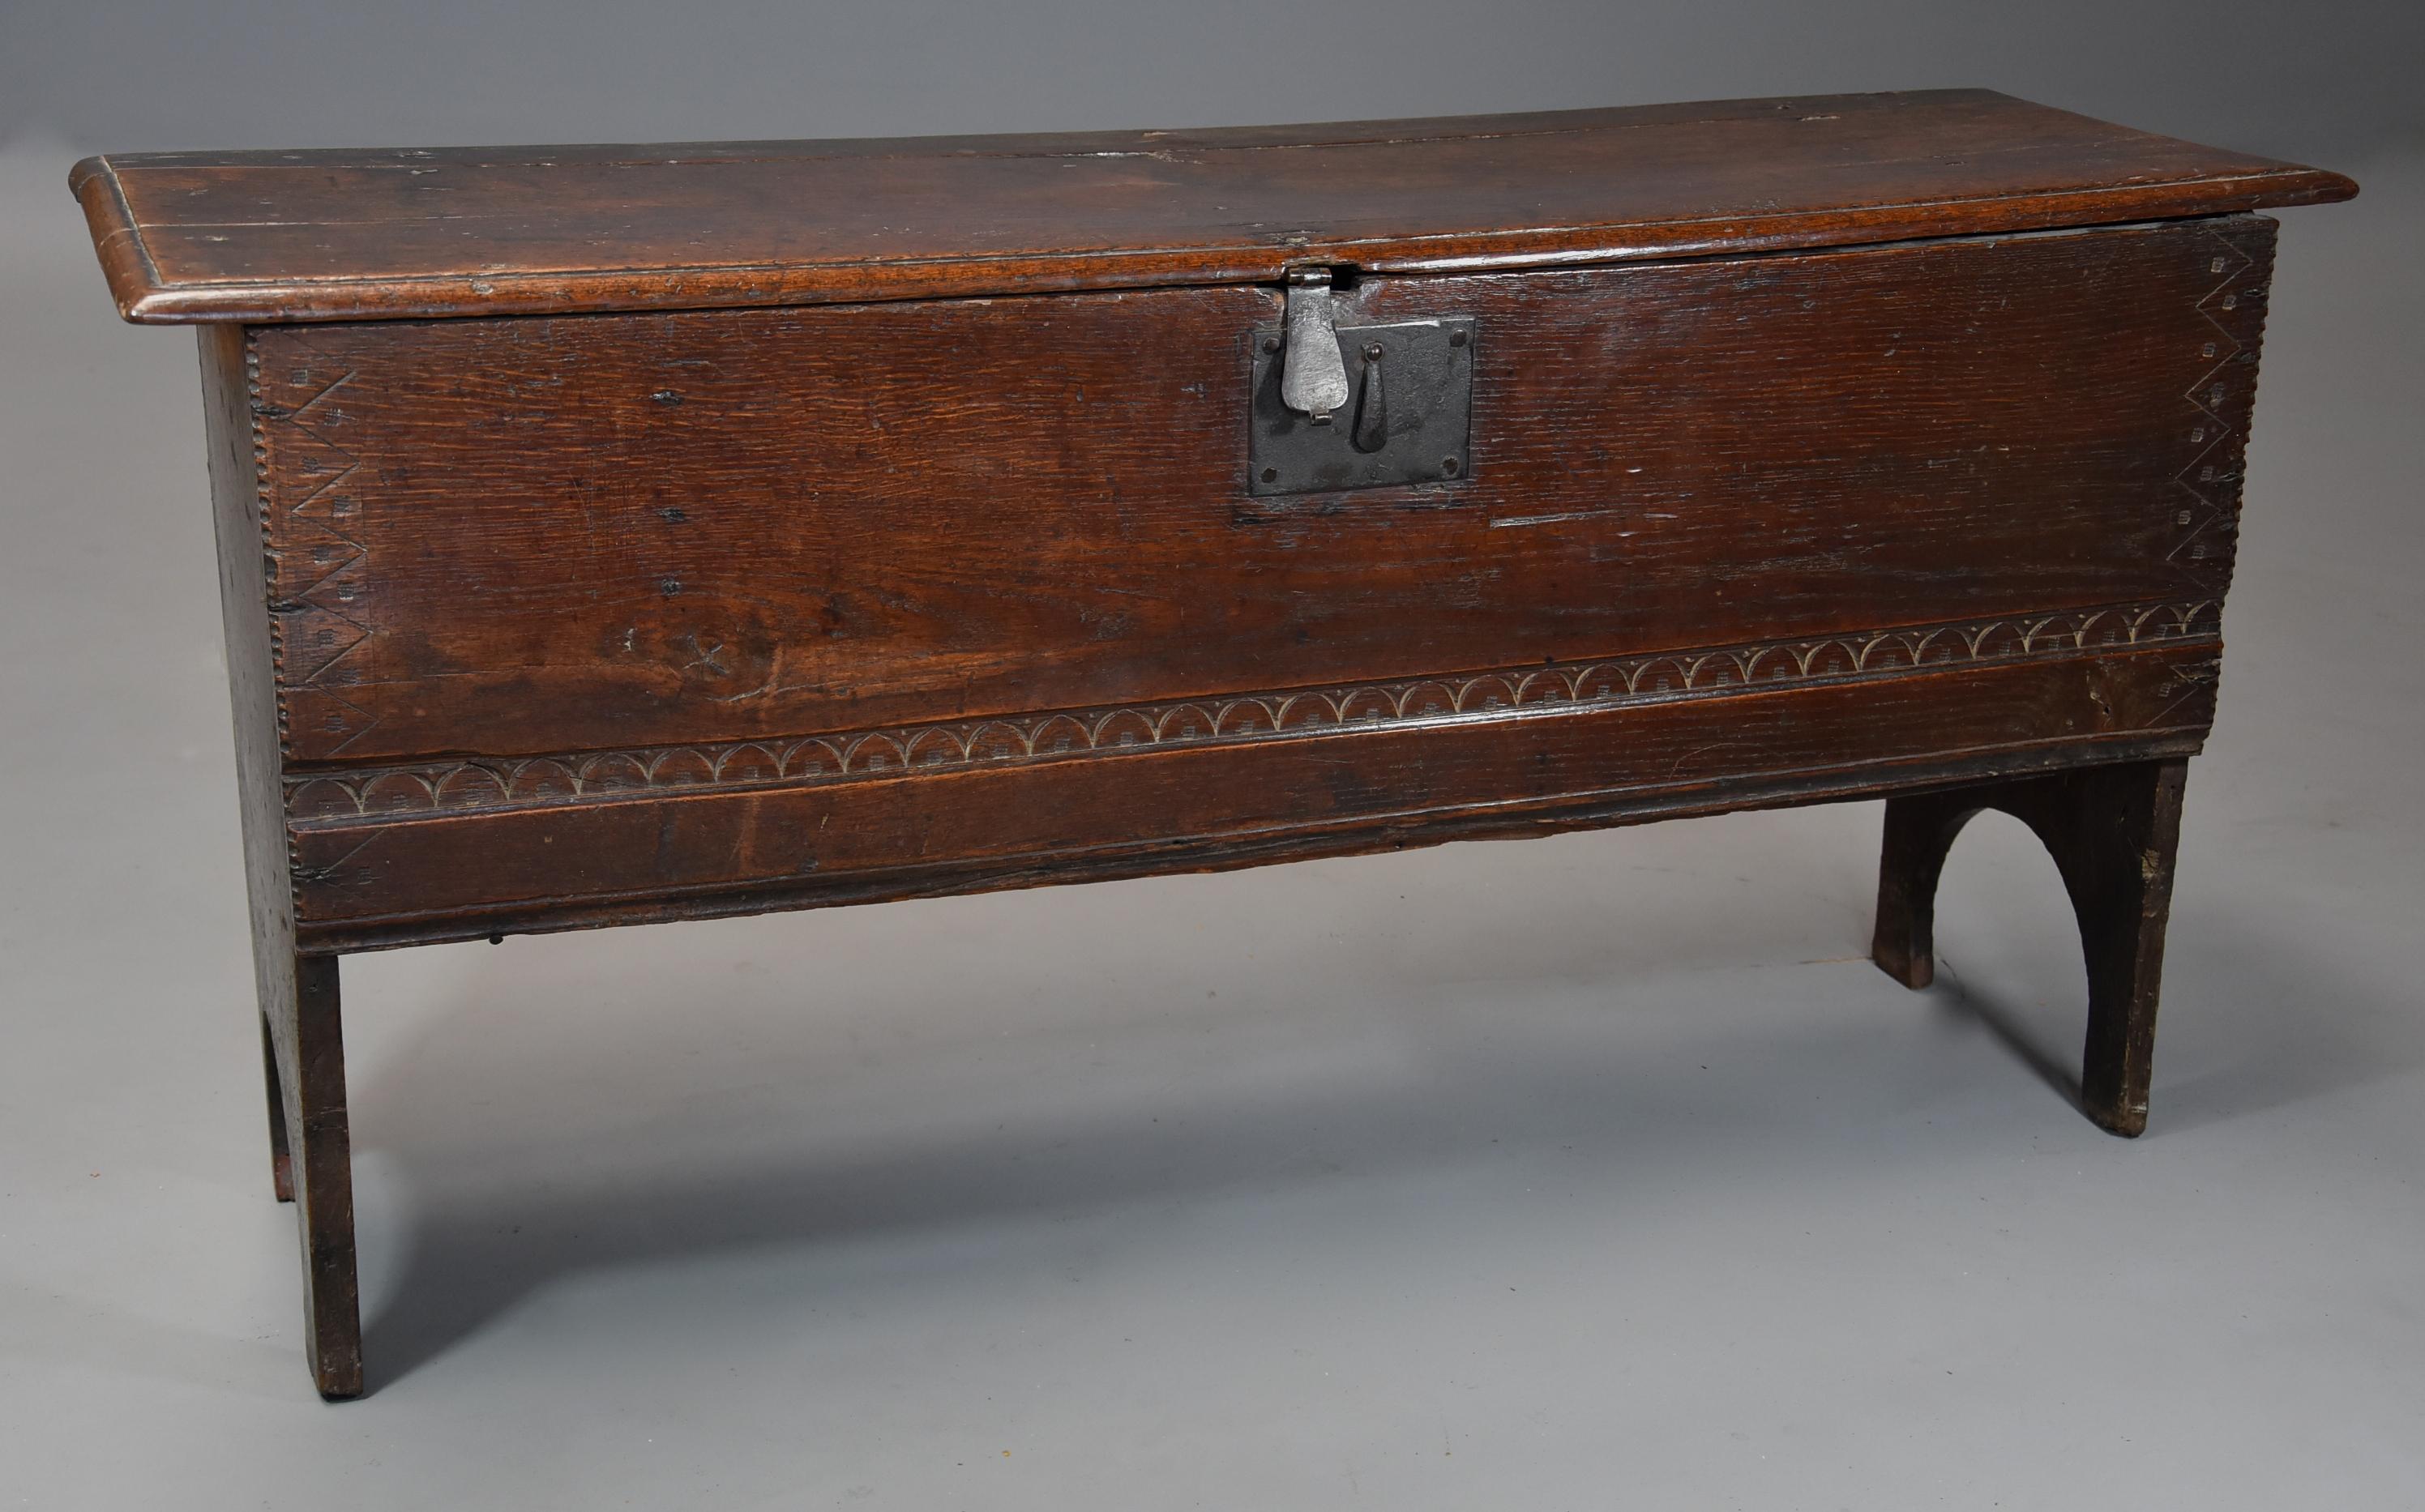 A late 17th century (circa 1690) oak six plank coffer with excellent patina (color) and of small, narrow proportions.

This coffer consists of a solid oak top of fine patina with a moulded edge with original steel catch and hinges, the lid opening